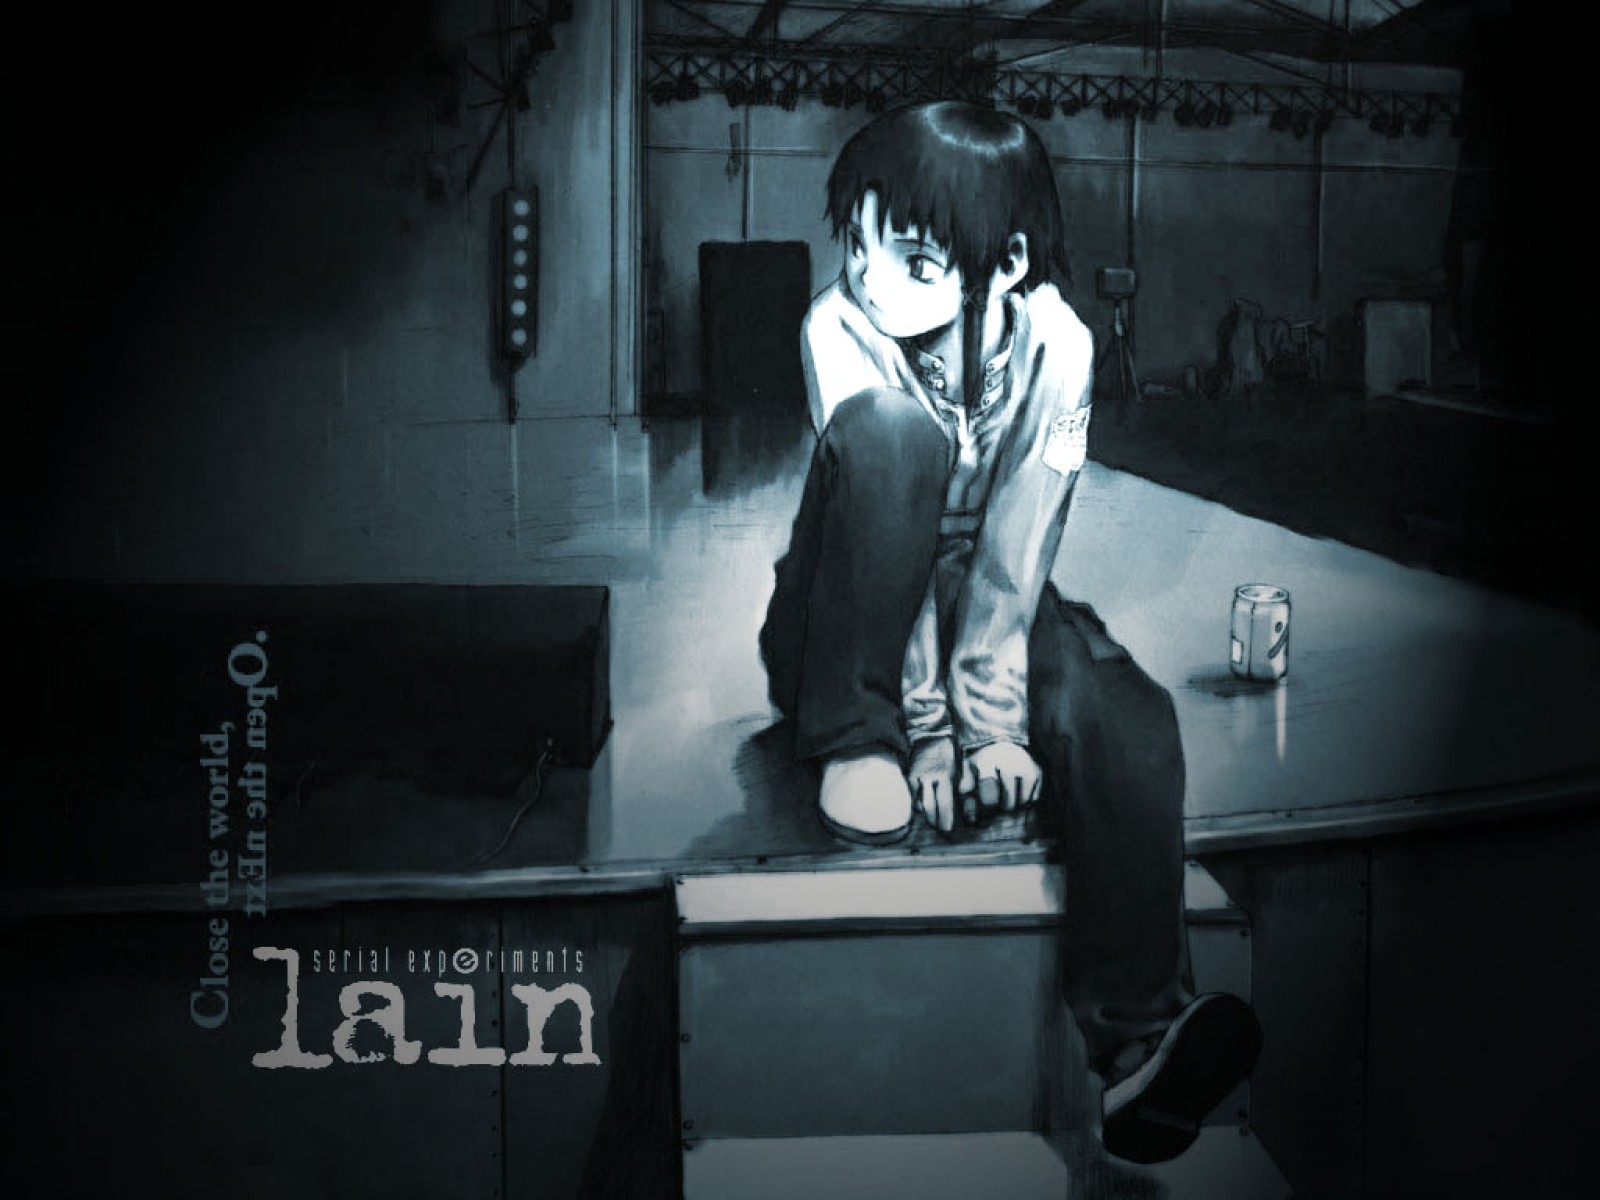 Serial Experiments Lain #3